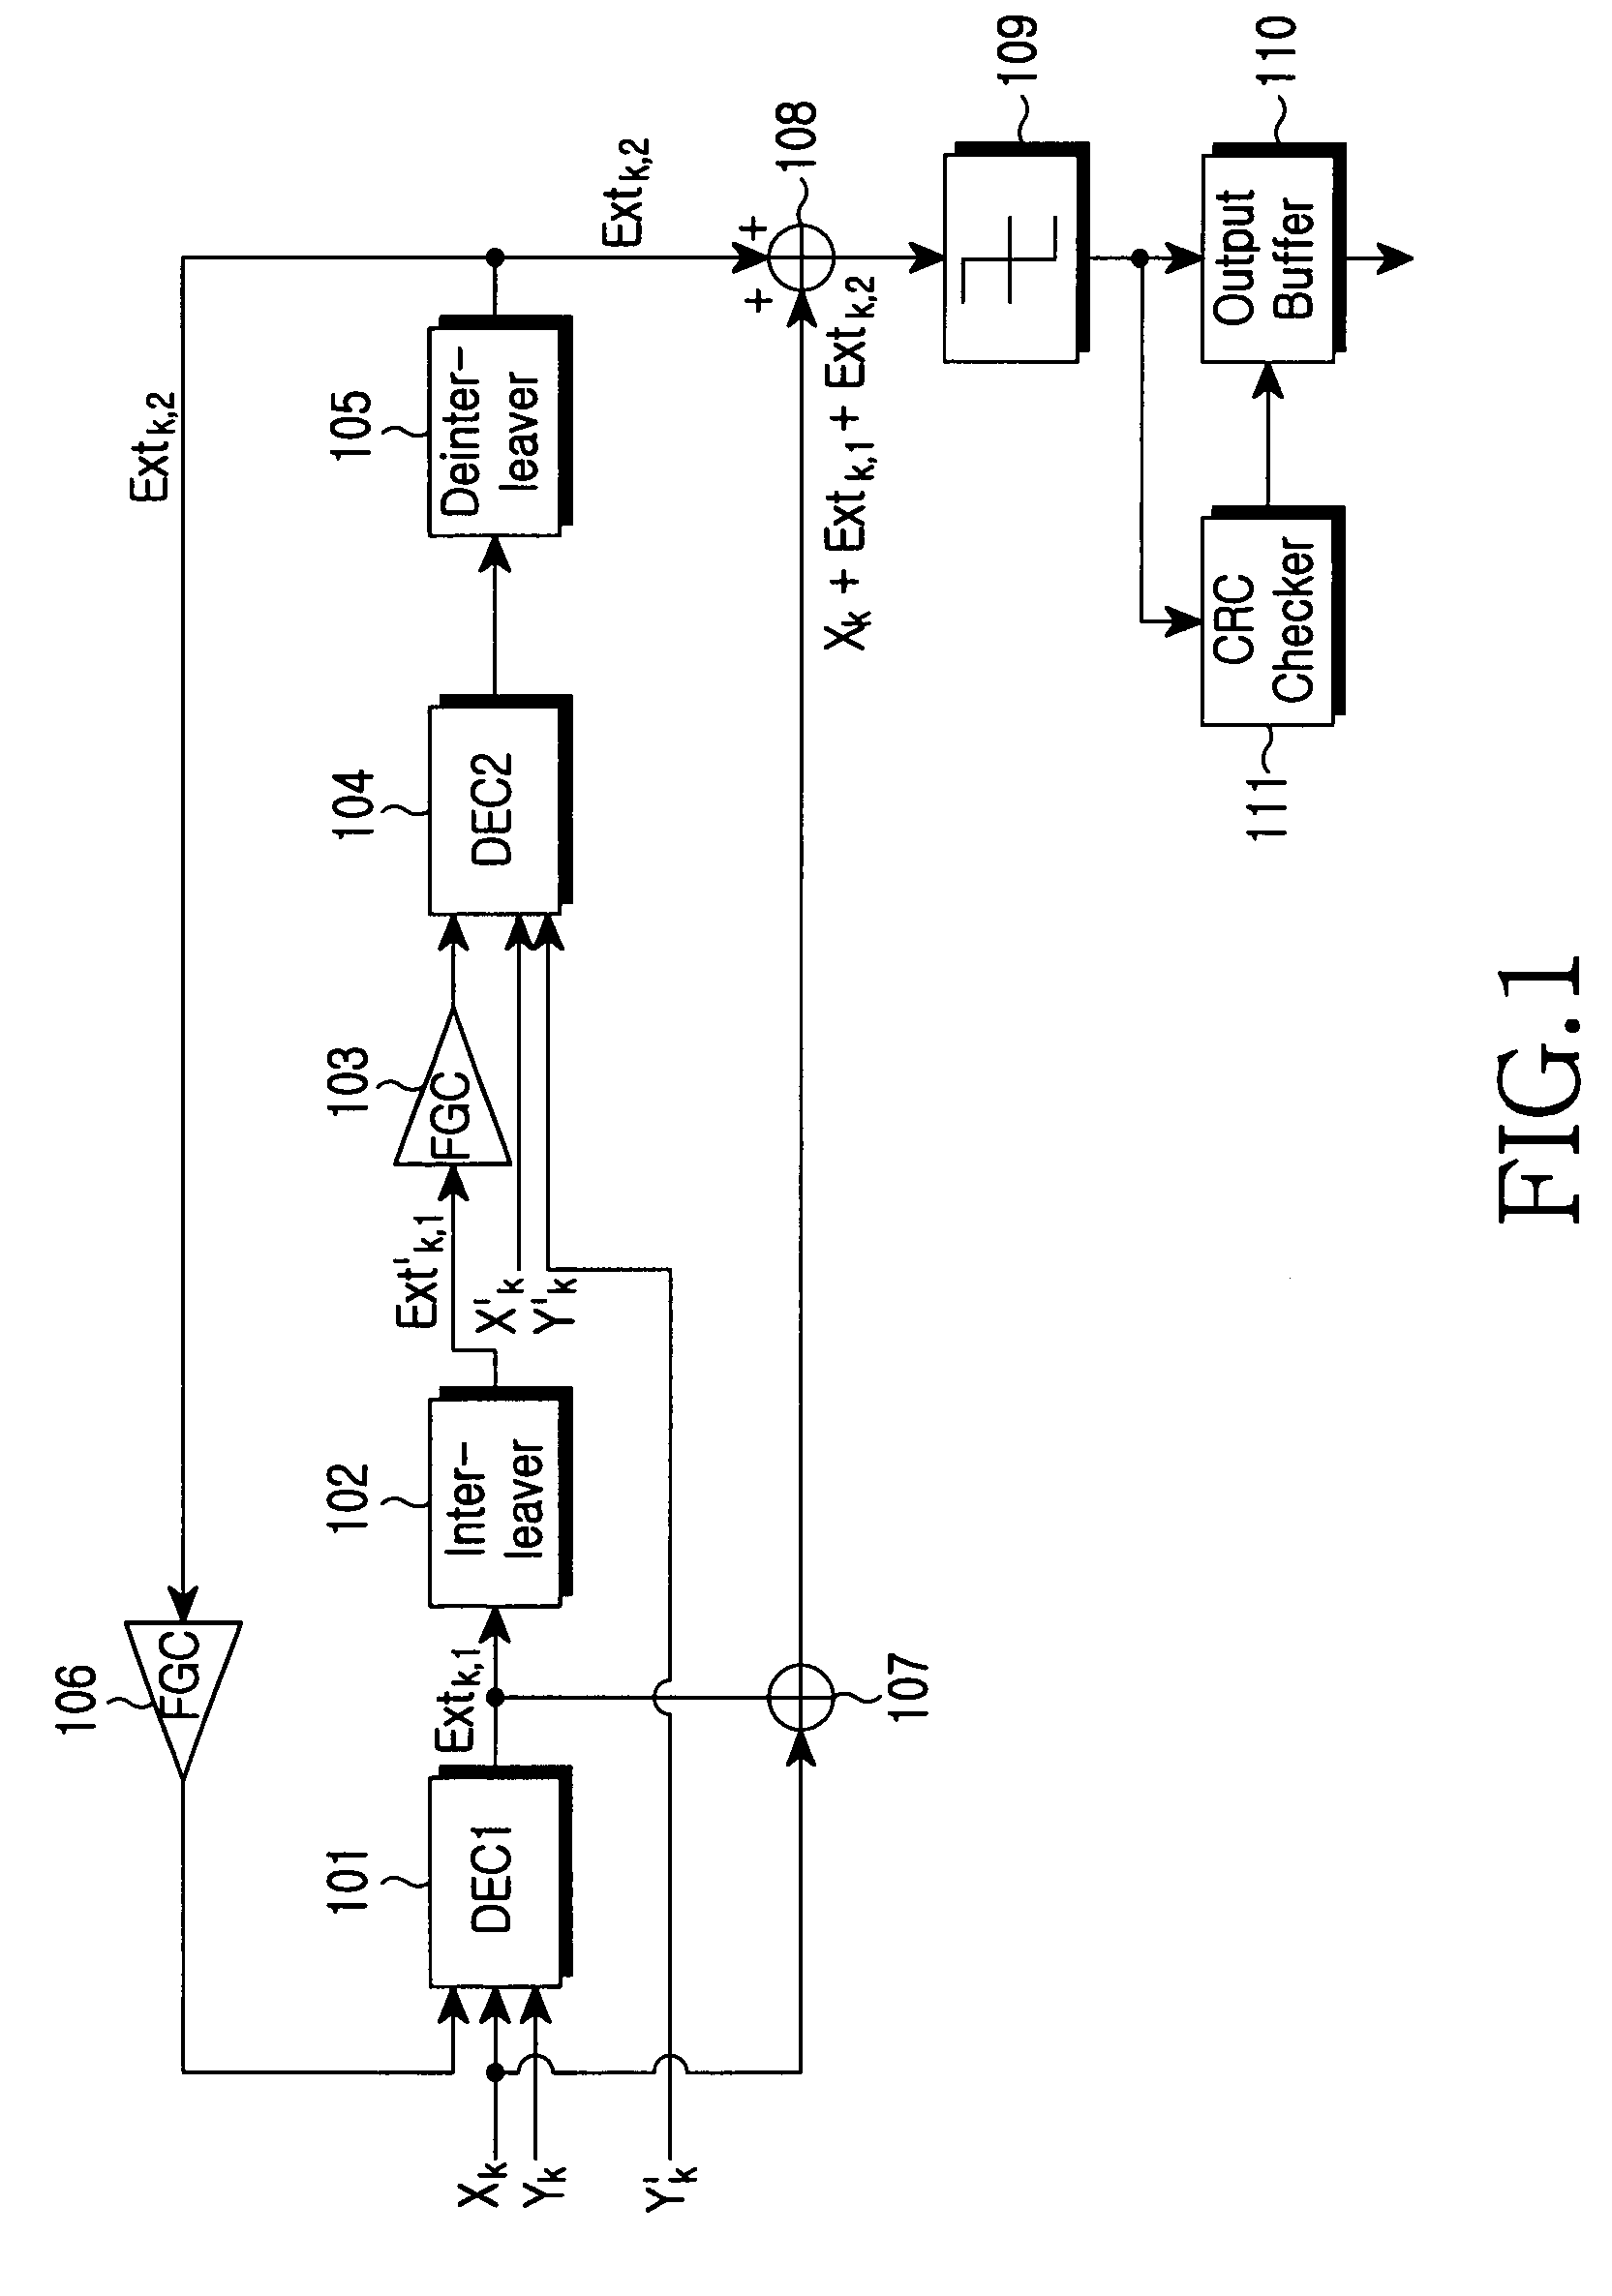 Apparatus and method for reducing Bit Error Rates (BER) and Frame Error Rates (FER) using turbo decoding in a digital communication system